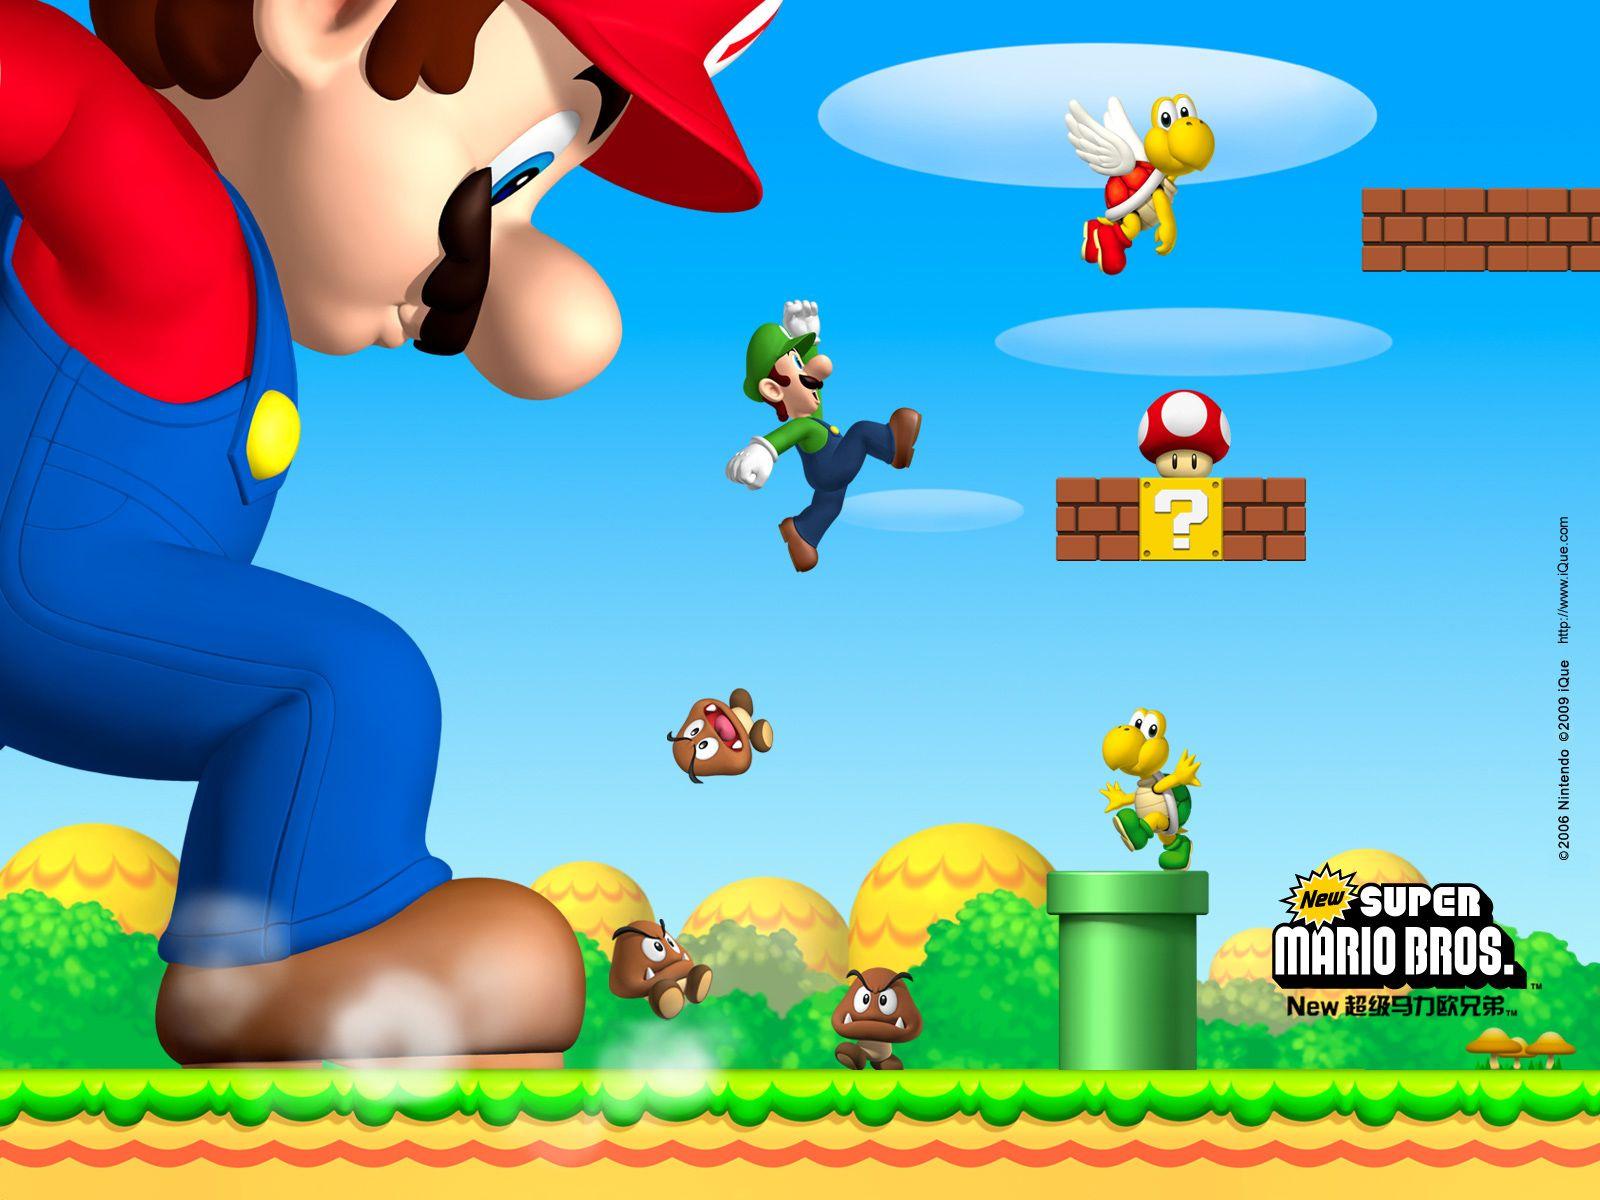 577125 new super mario bros  Full HD Background  Rare Gallery HD  Wallpapers